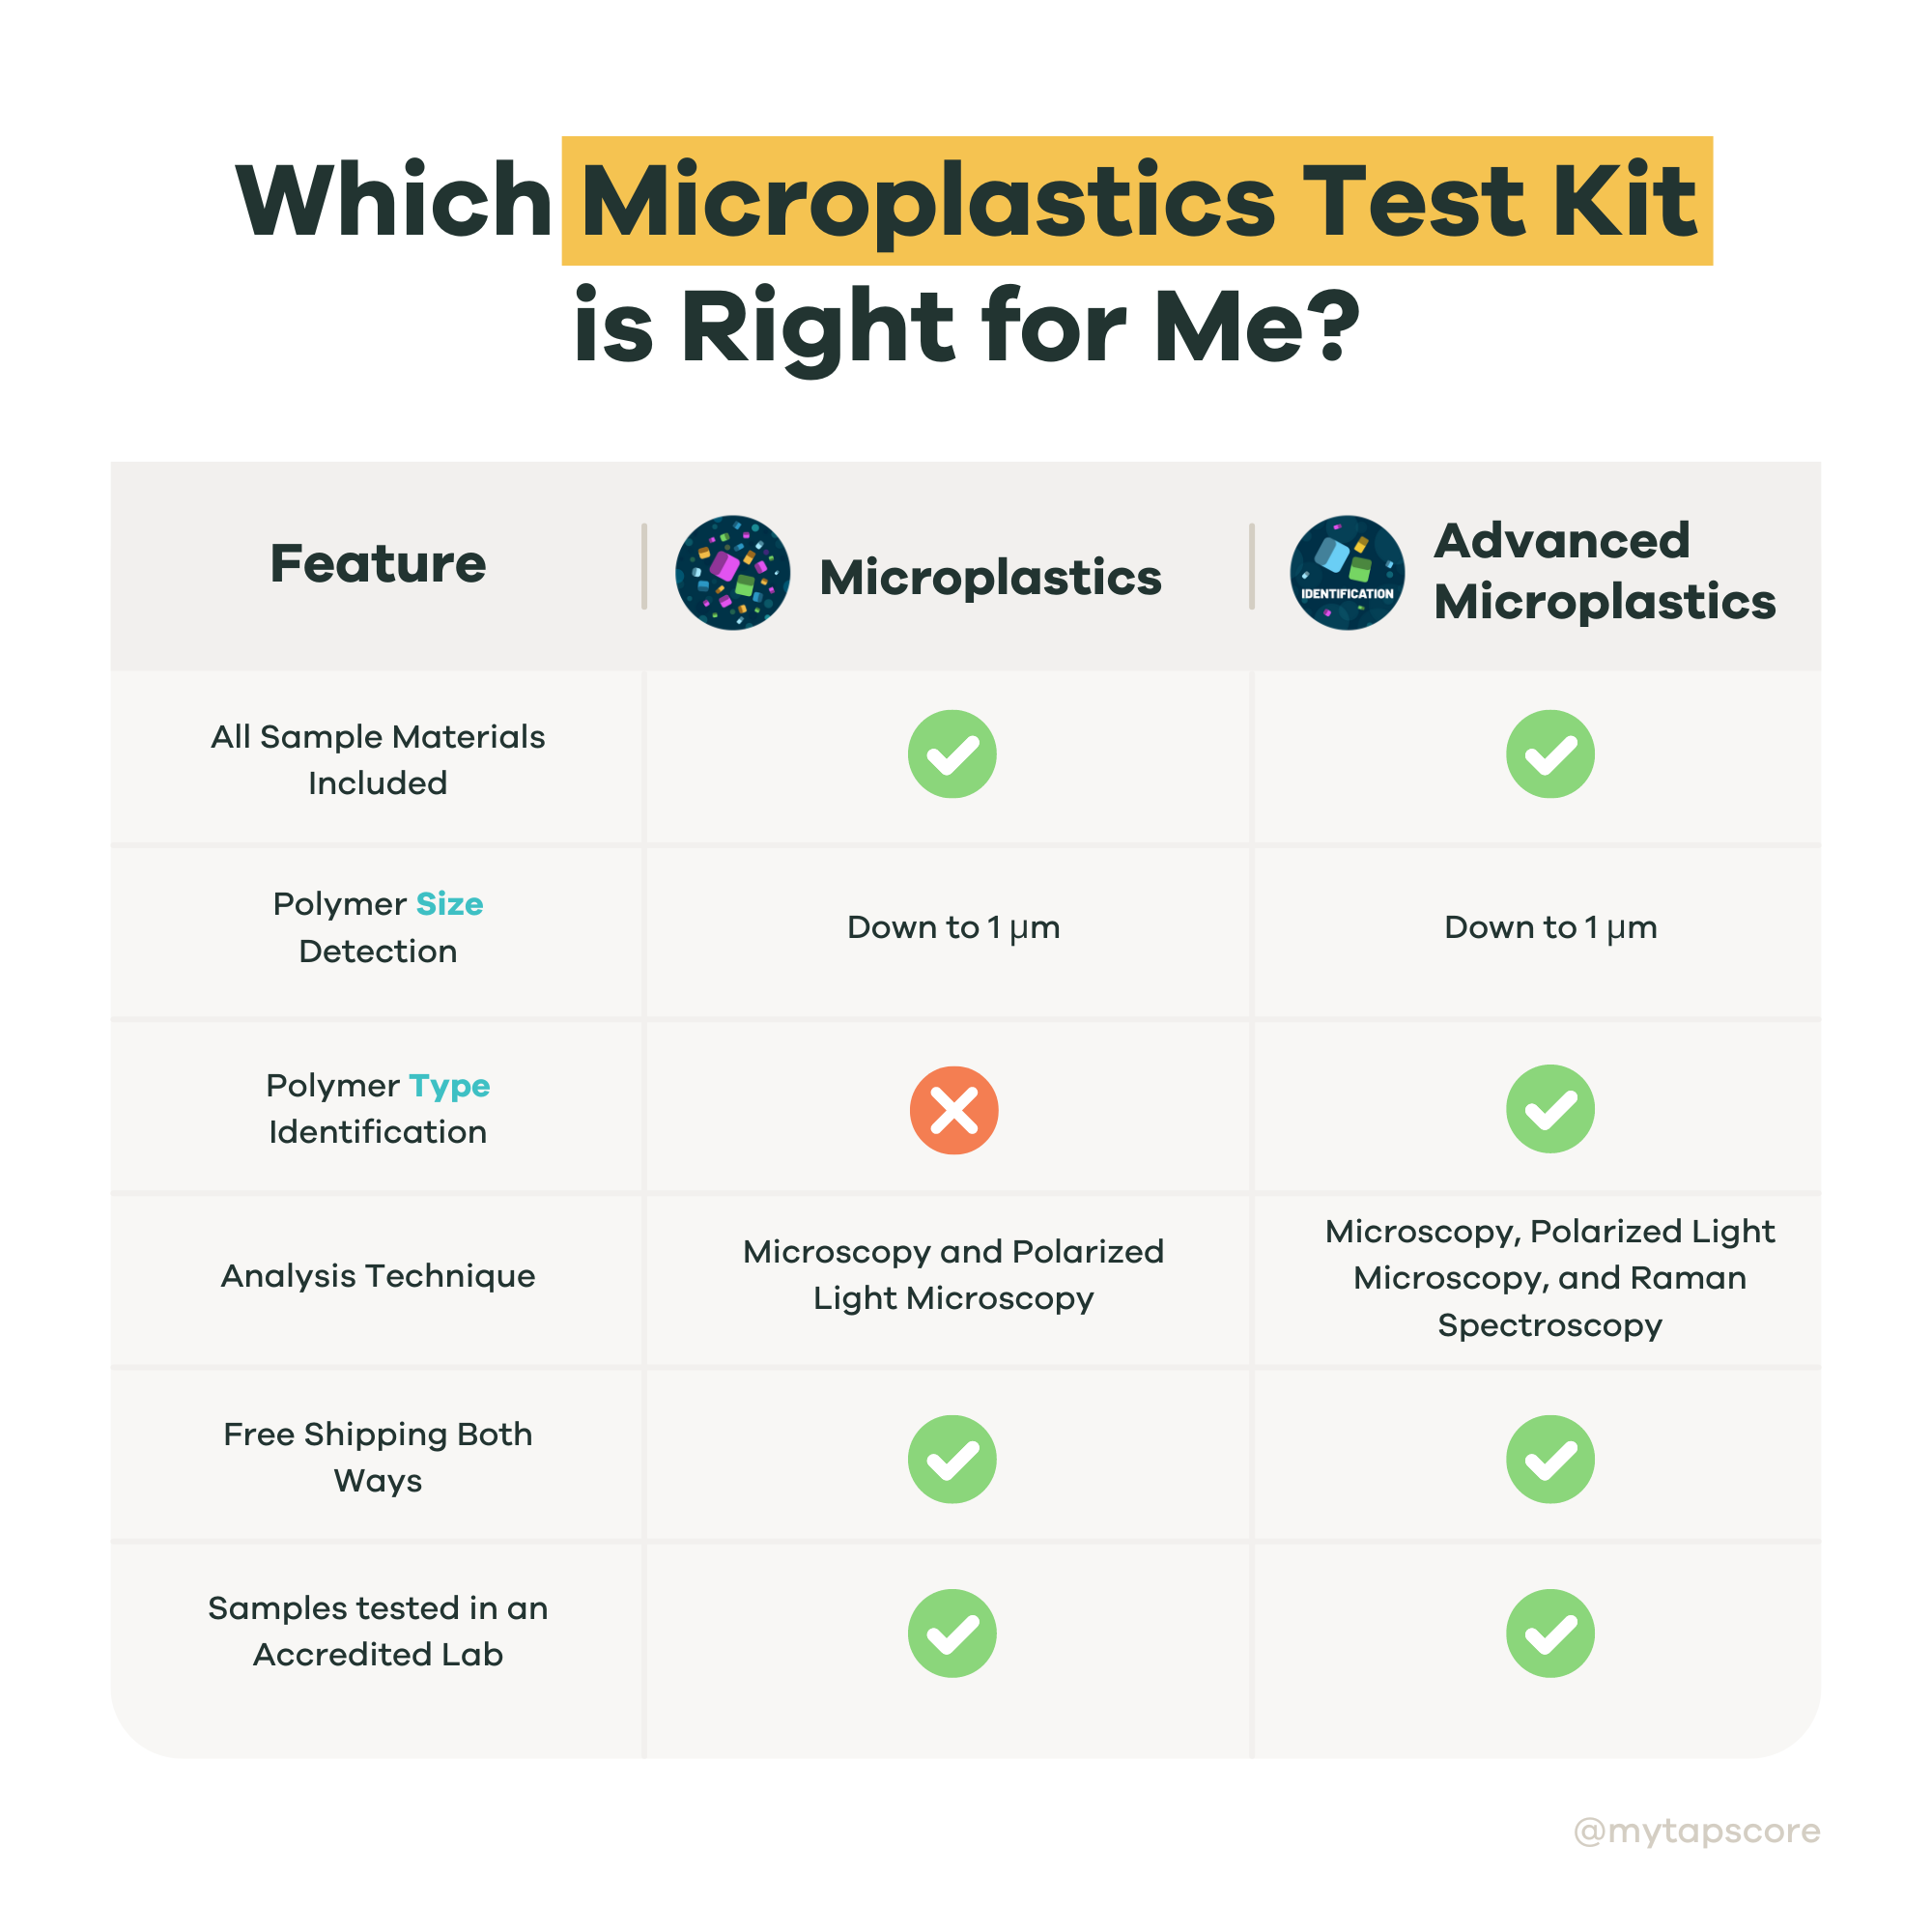 which microplastics test is right for me?